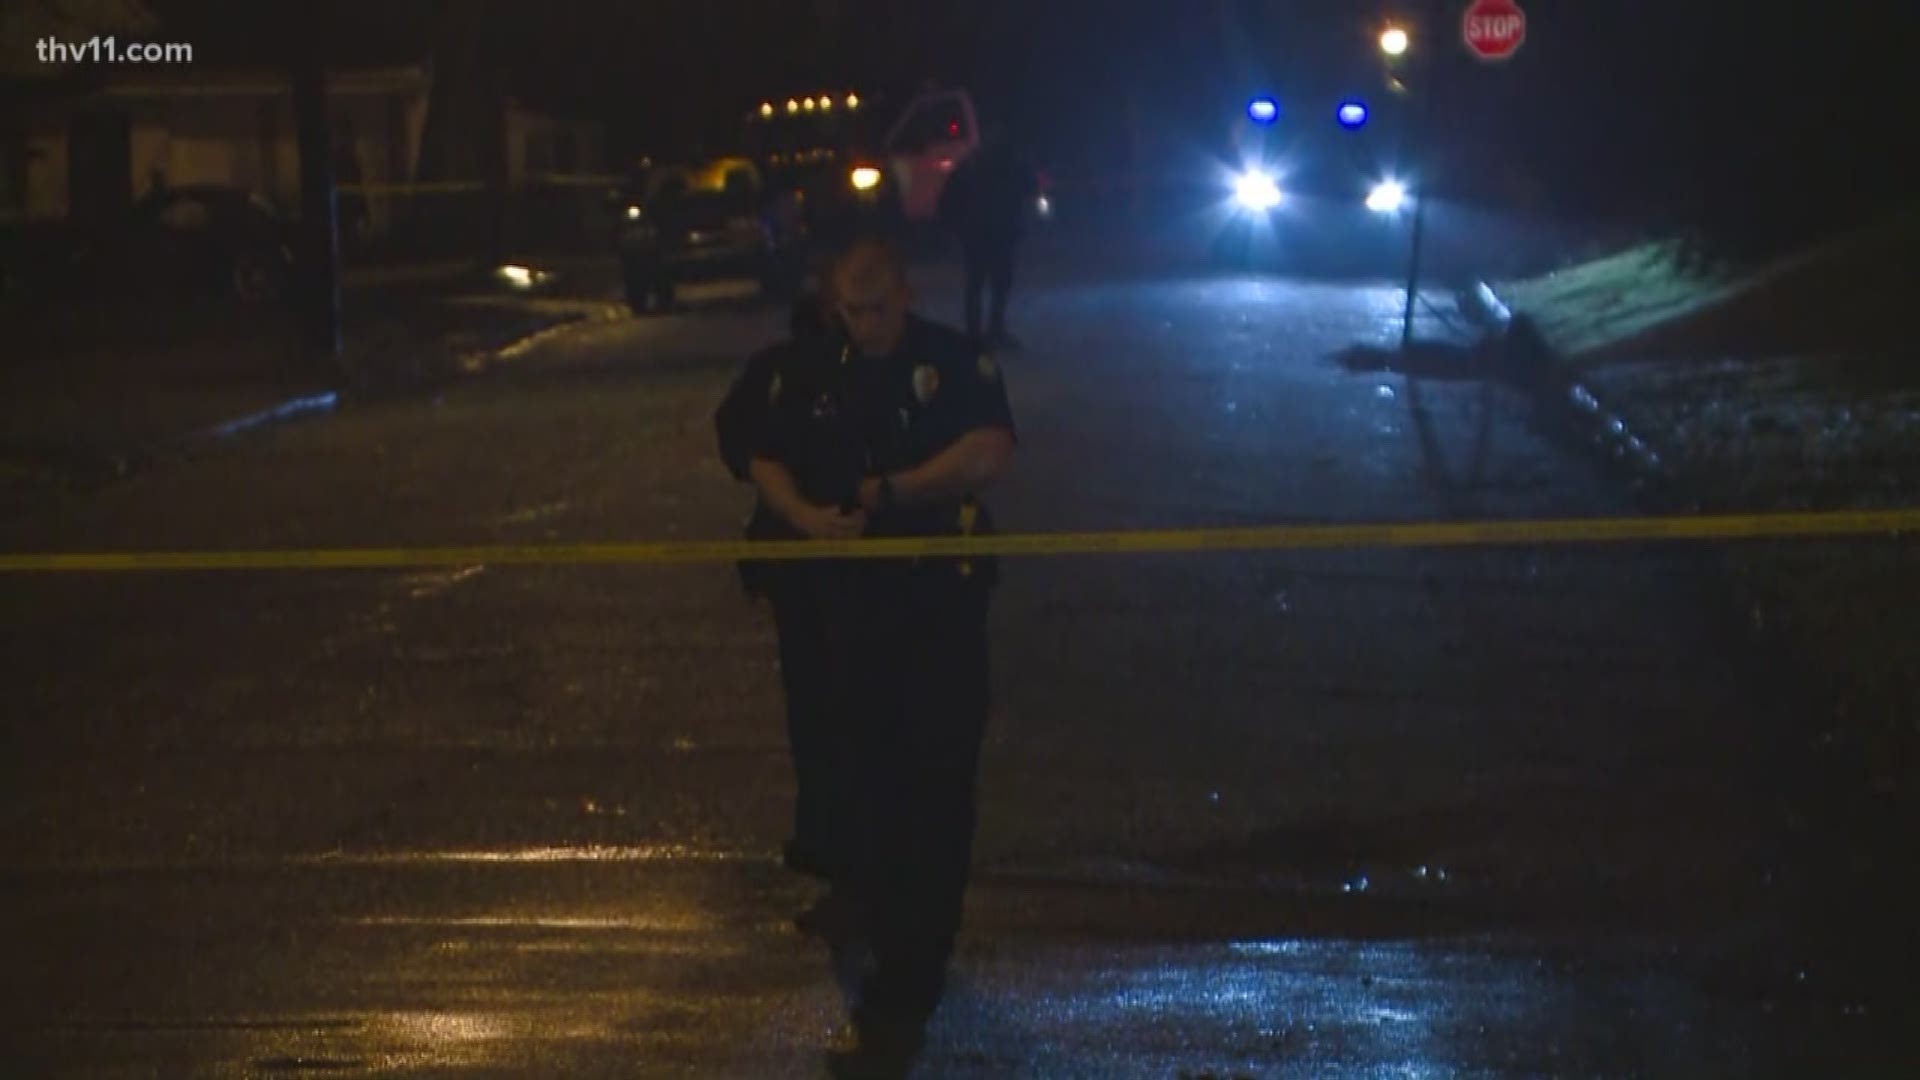 One person has been killed and another injured during a drive-by shooting in Little Rock.